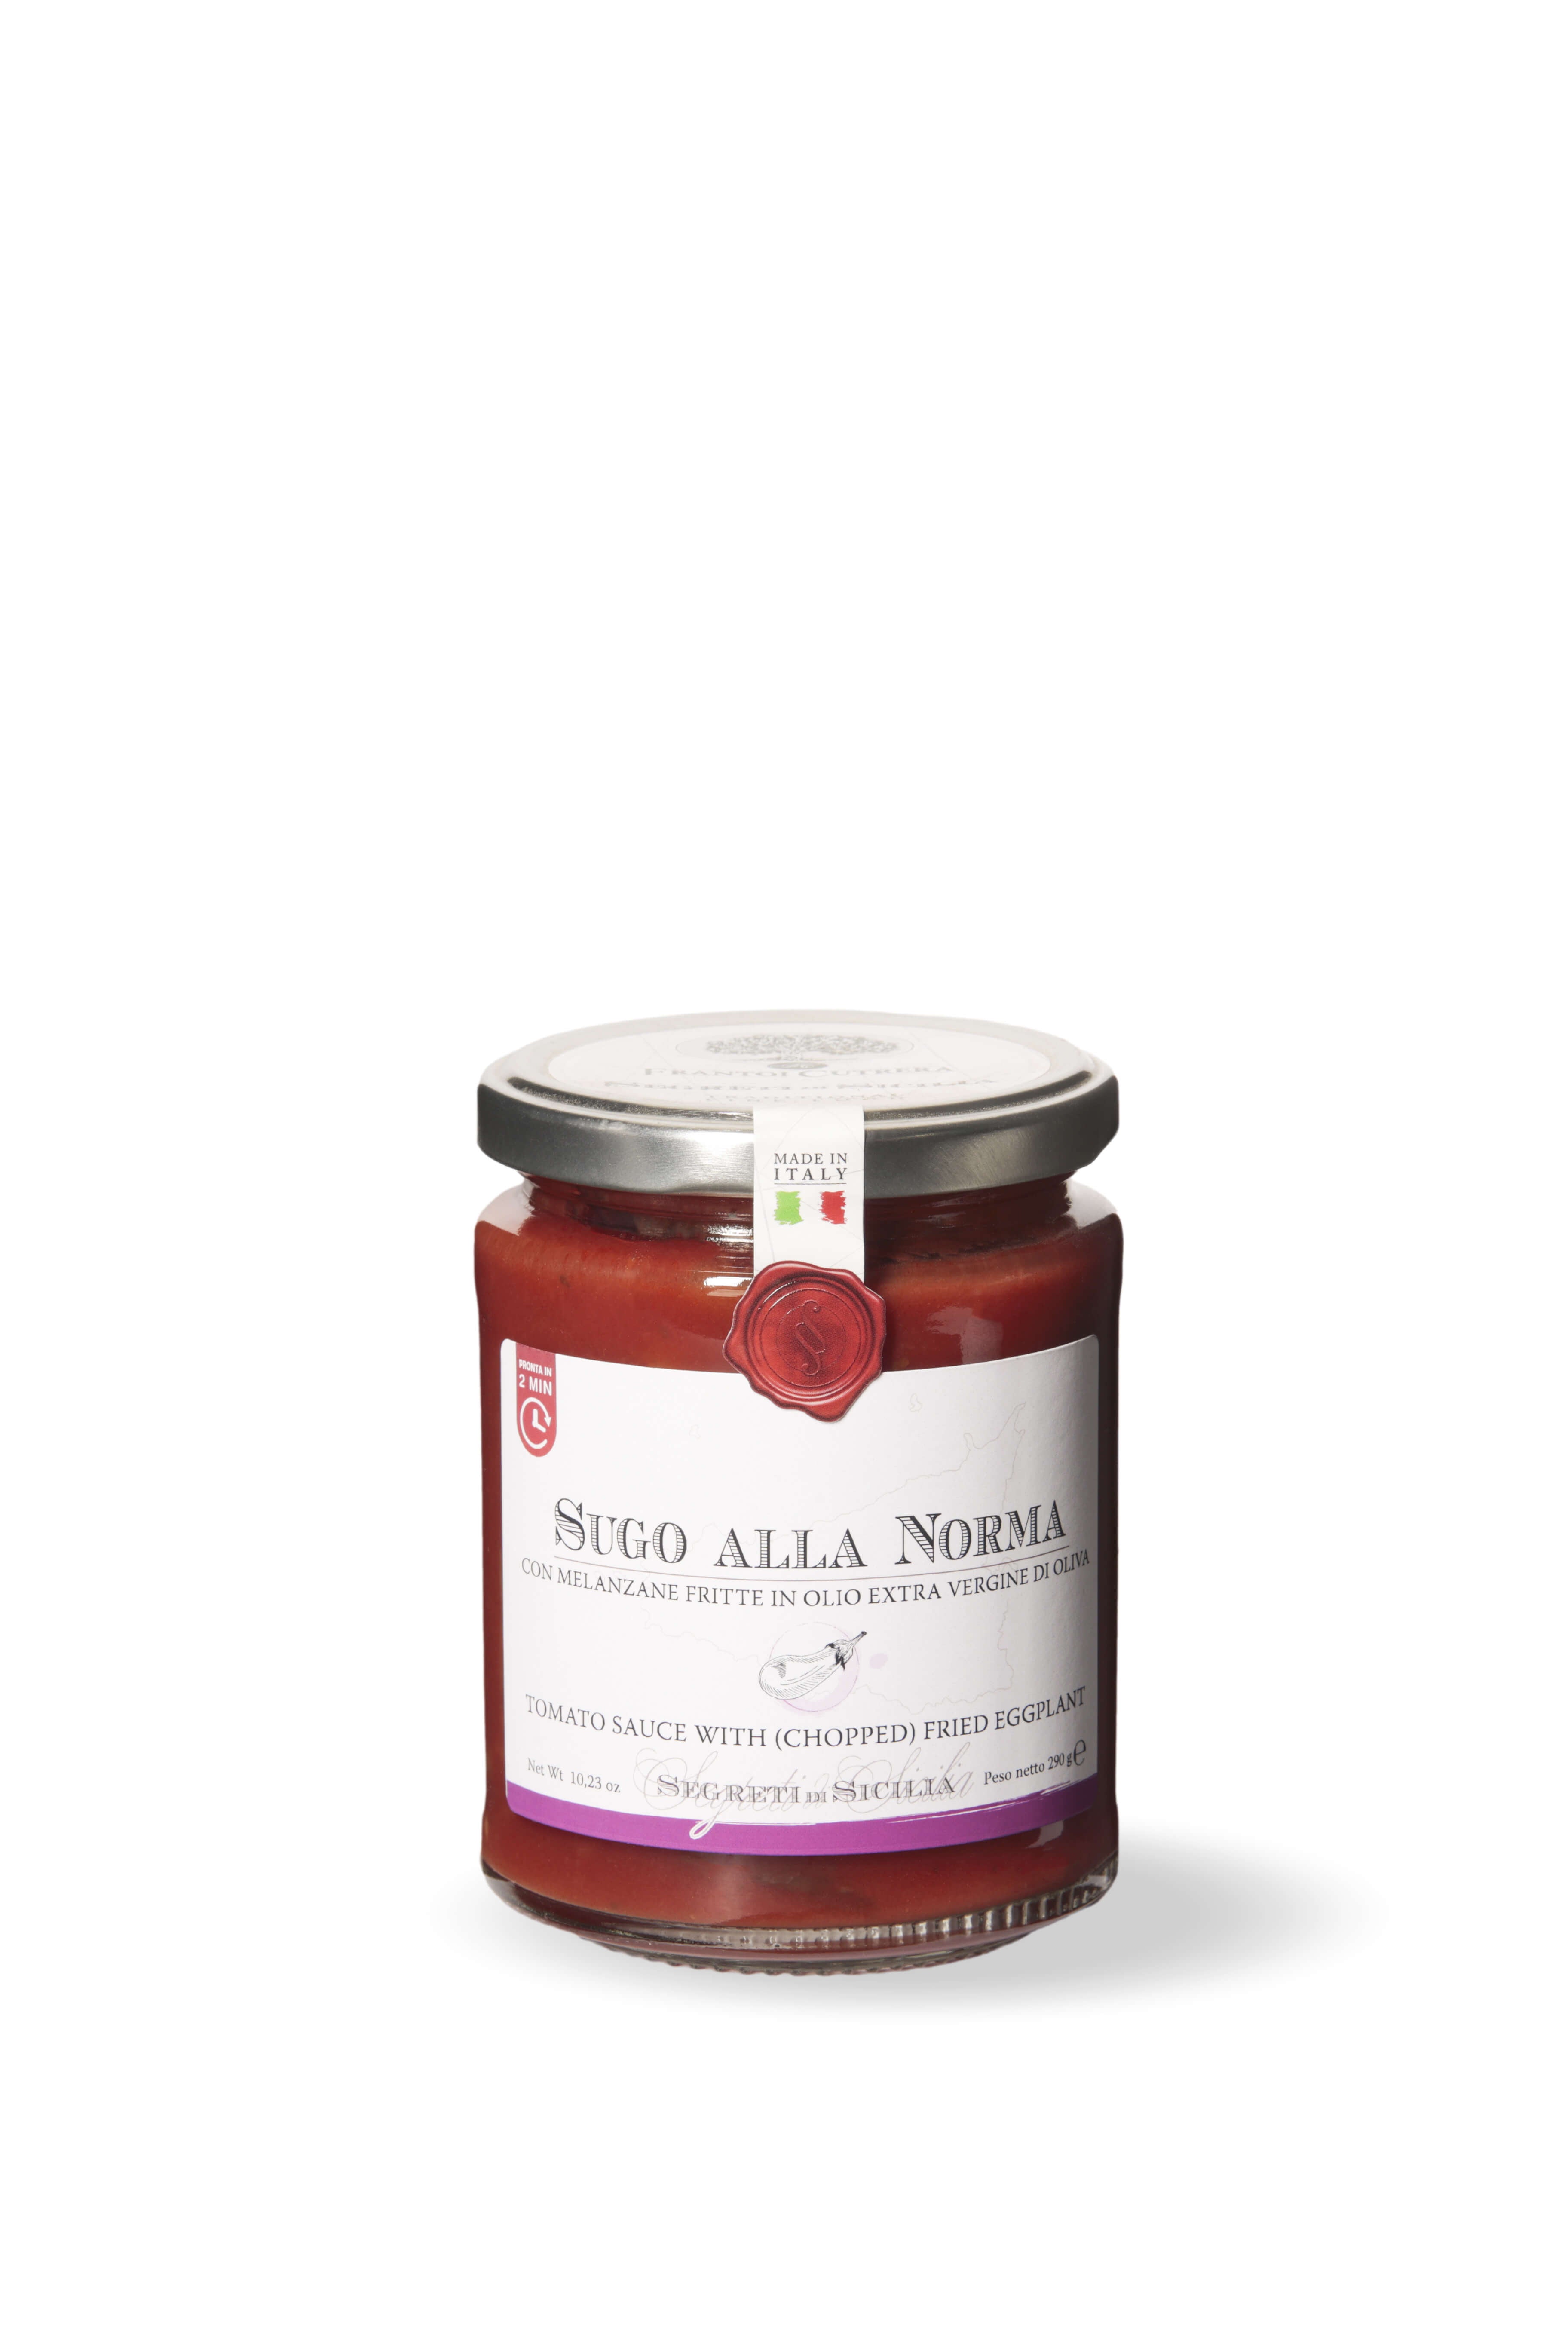 Norma sauce with fried aubergines in extra virgin olive oil - Secrets of Sicily